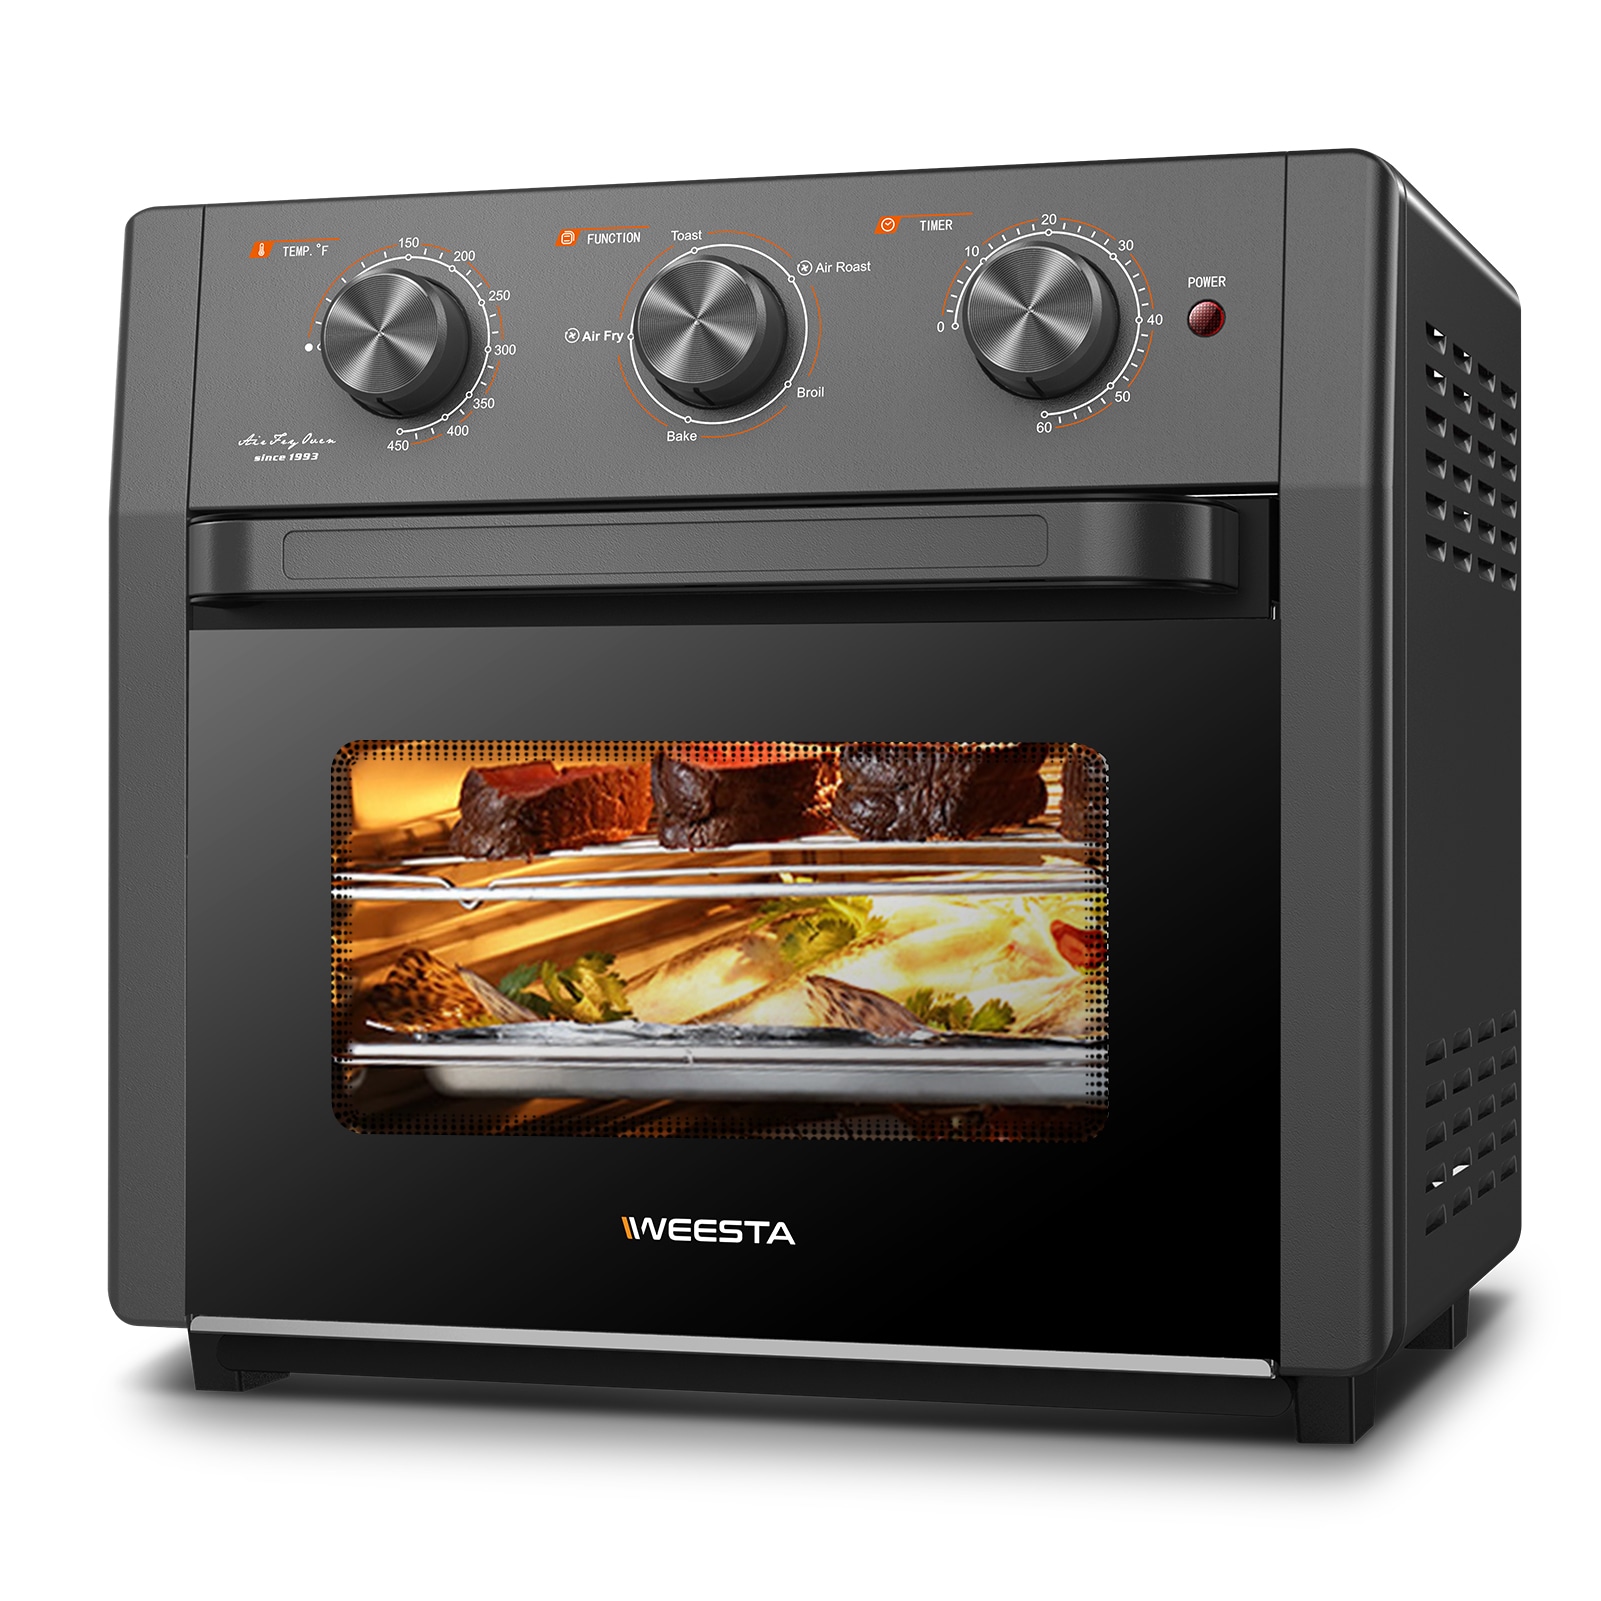 How Many Watt Does An Electric Oven Use?